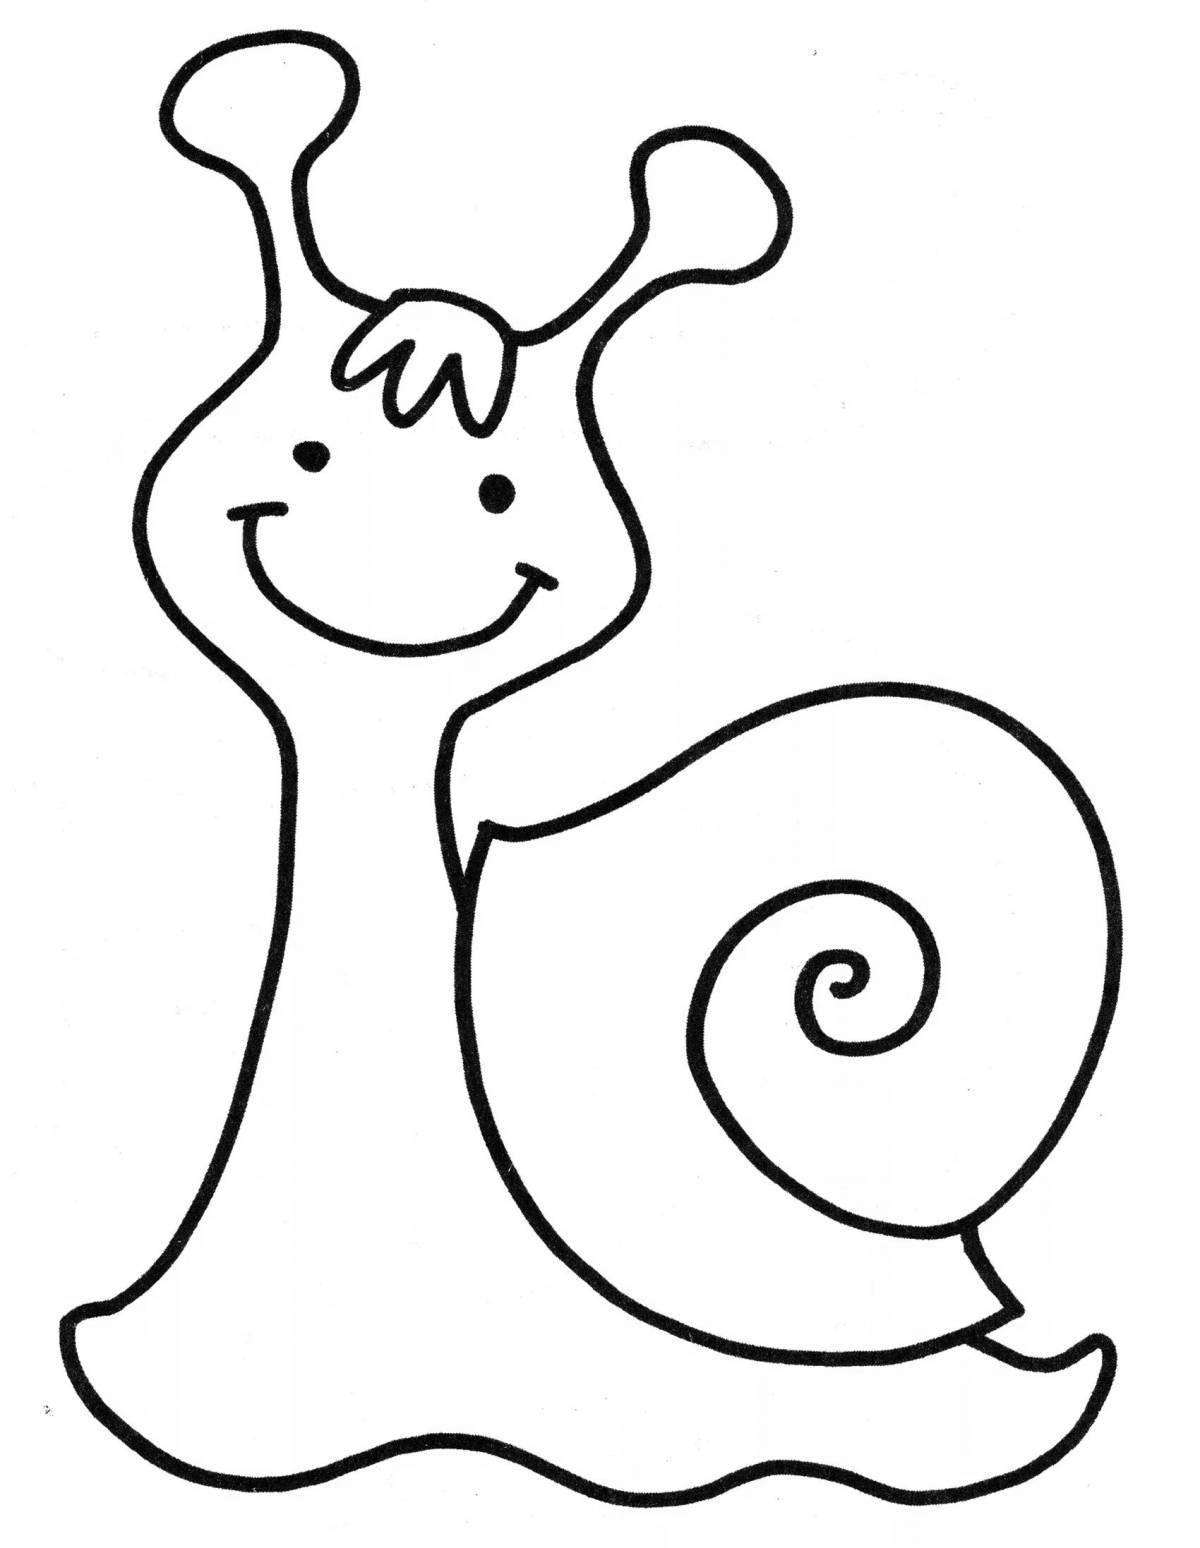 Bright coloring snail for the little ones